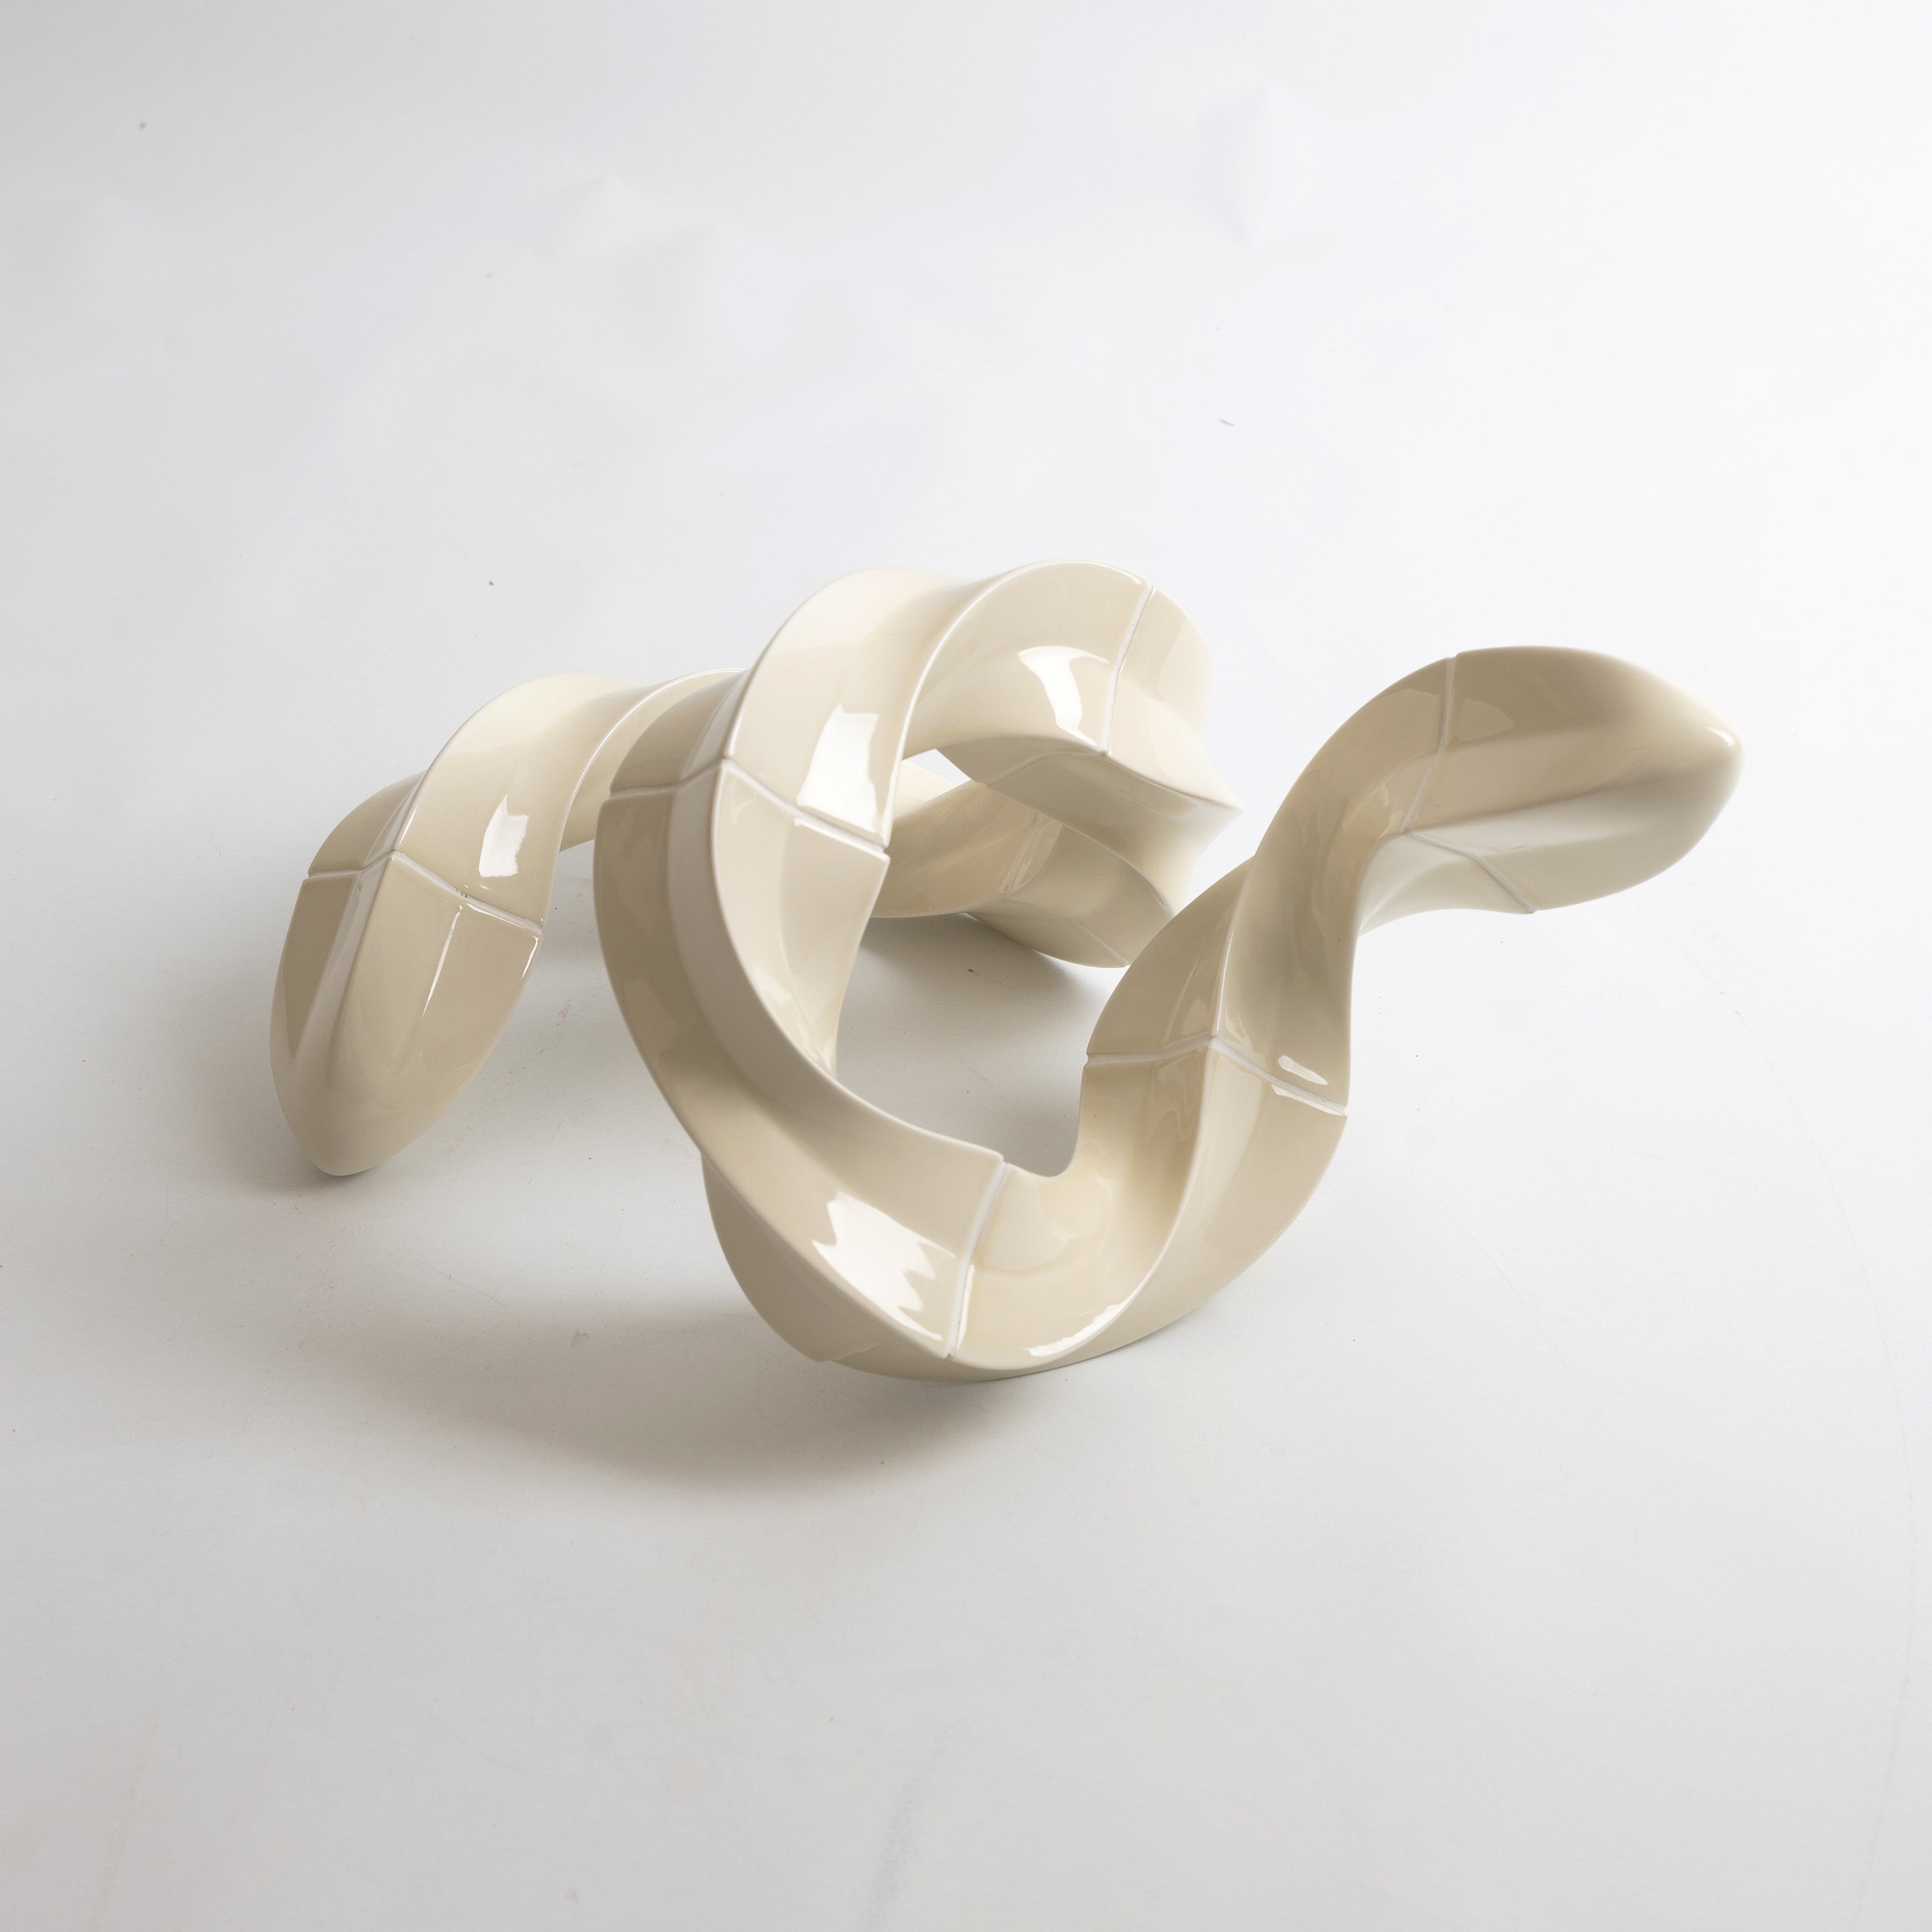 MOBIUS SPRING OBJECT - BEIGE